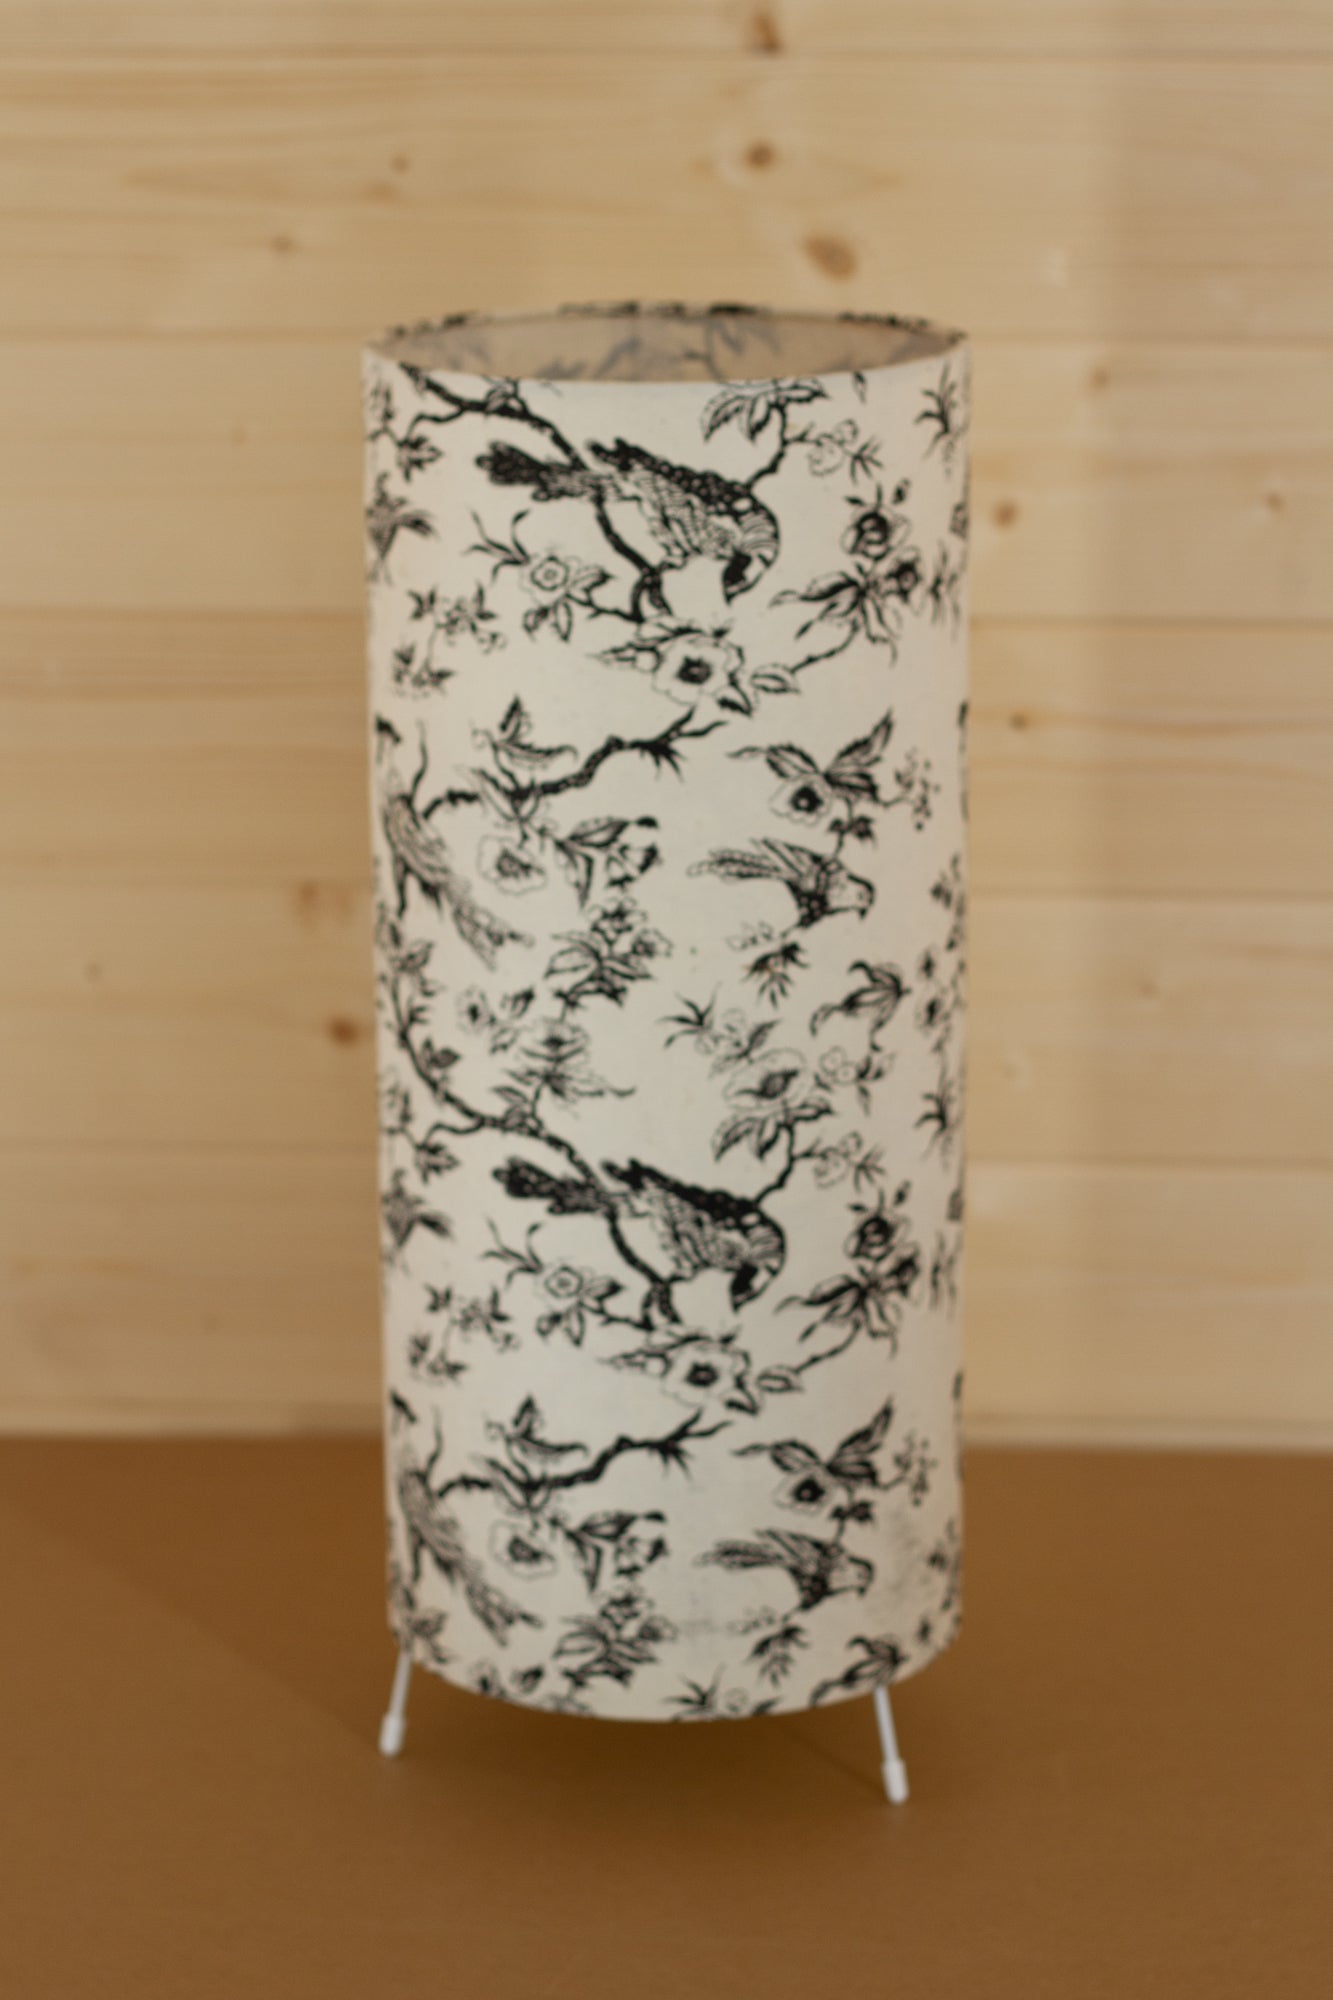 Free Standing Table Lamp Large - P41 - Oriental Birds